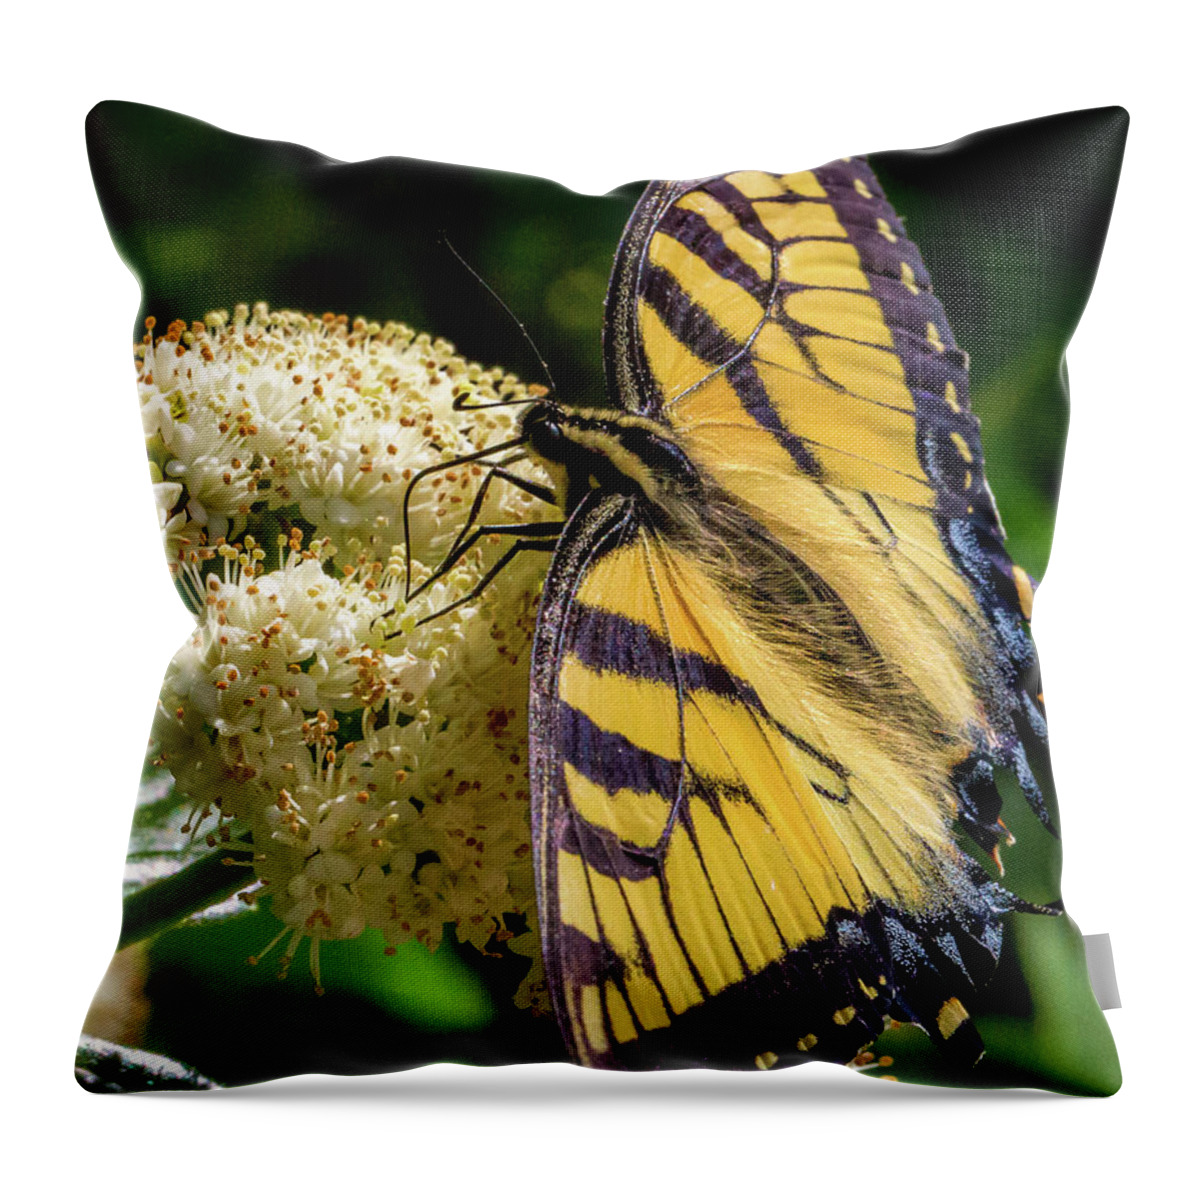 Butterfly Throw Pillow featuring the photograph Fuzzy Butterfly by Lora J Wilson